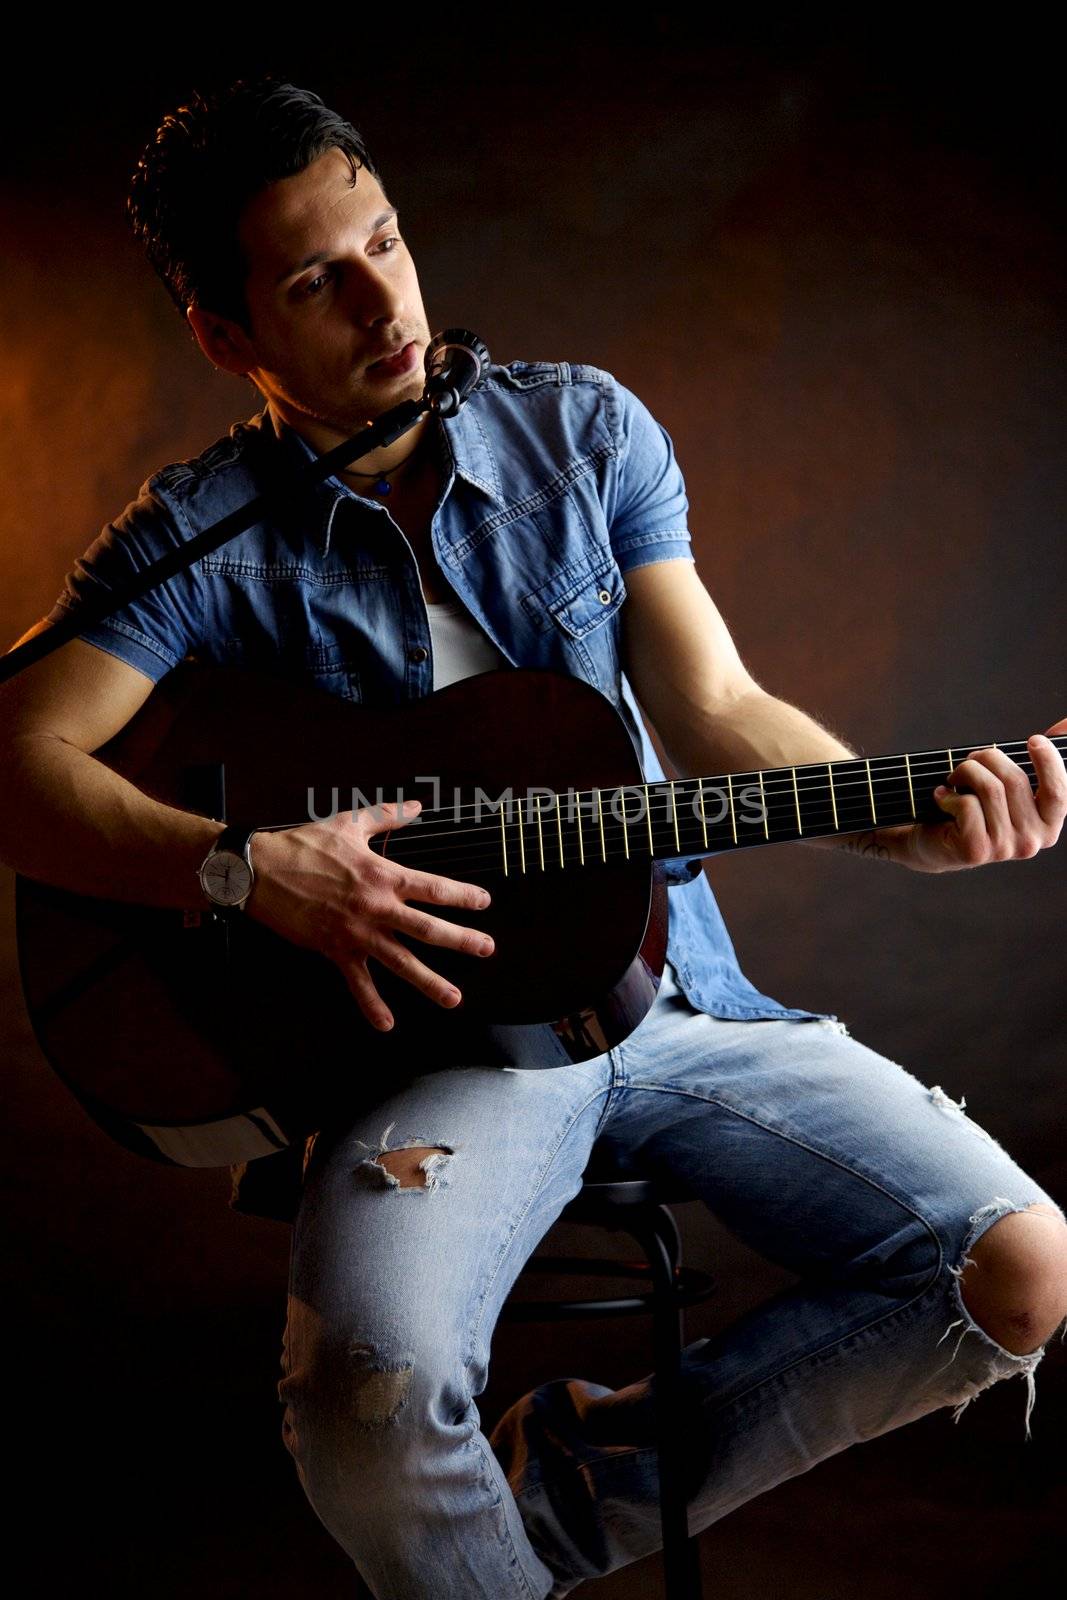 Serious male model with guitar intense